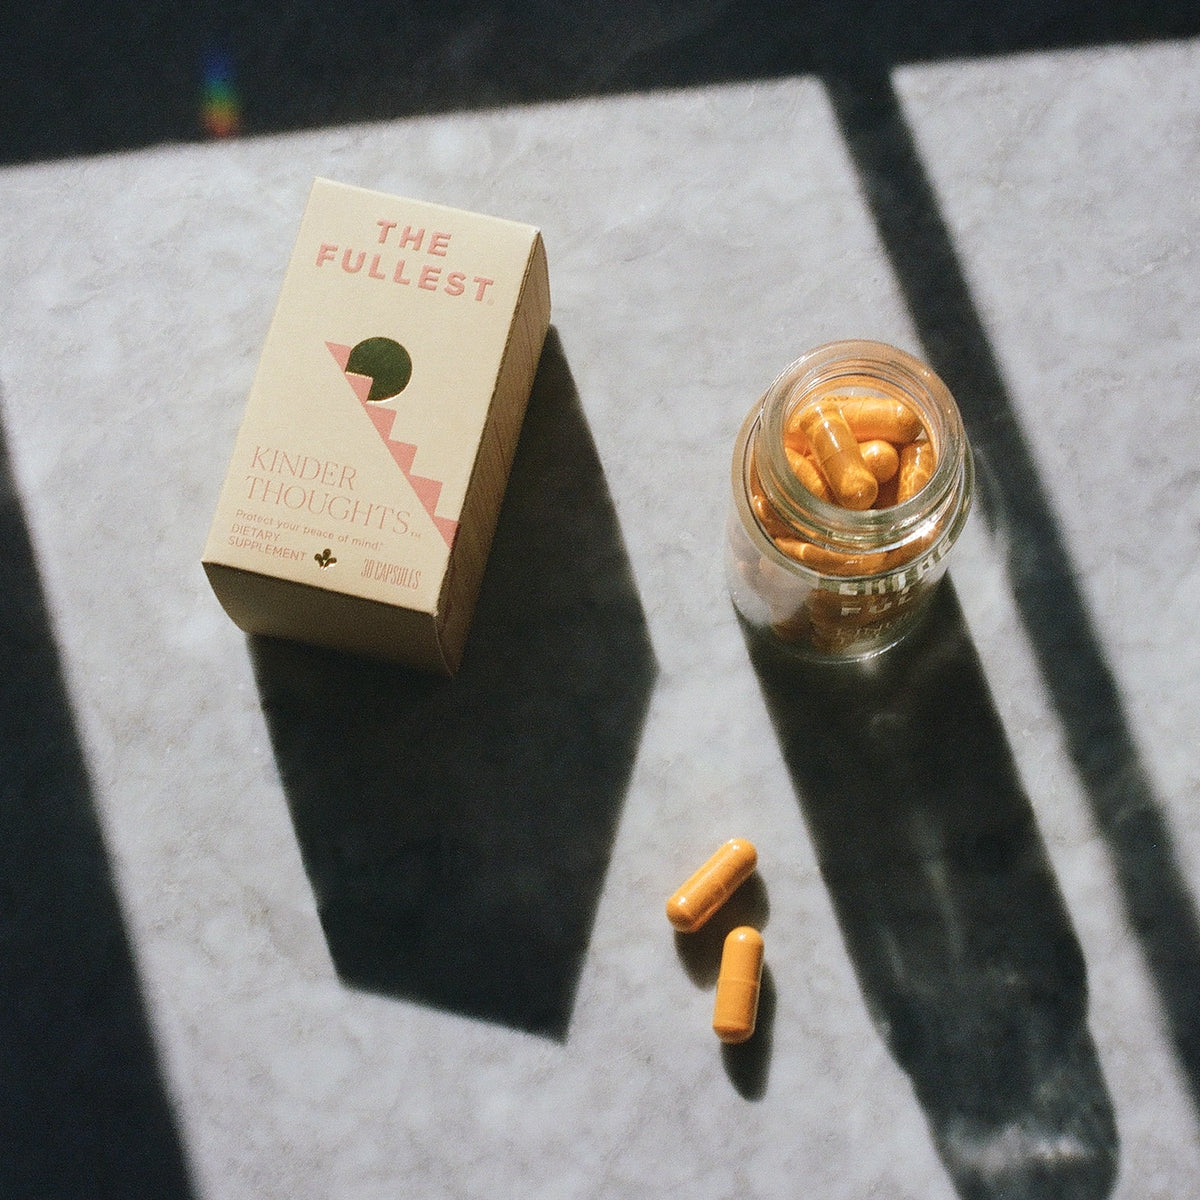 A box of &quot;Happy Habits Bundle&quot; saffron supplements beside an open glass jar with several capsules spilled out, in natural lighting with shadows.